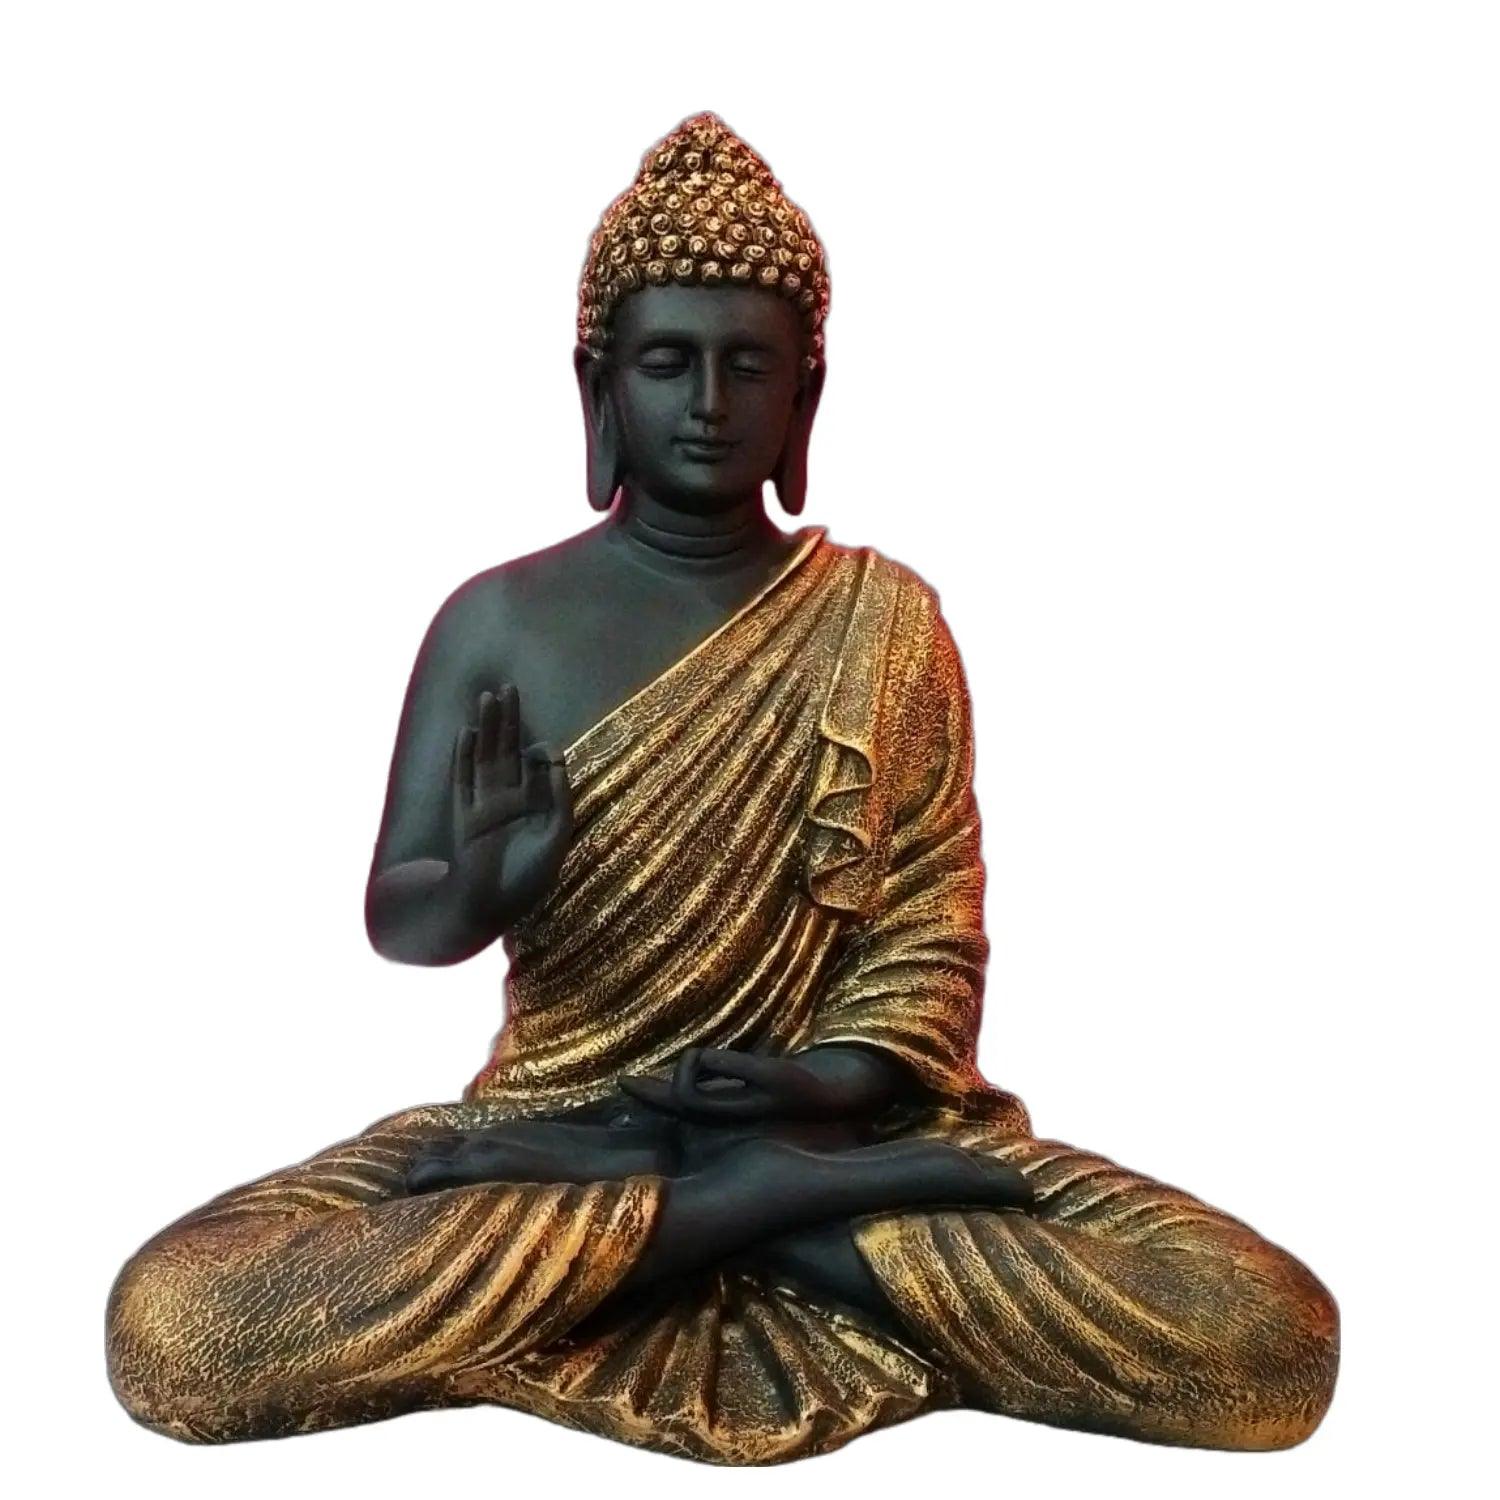 Statue ALiLA Big Size Meditating Black Golden Buddha Idol Statue Showpiece for Home Garden Living Room Decor Decoration Gift Gifting Items, 14 inches / 35cm / 1 Feet Statue